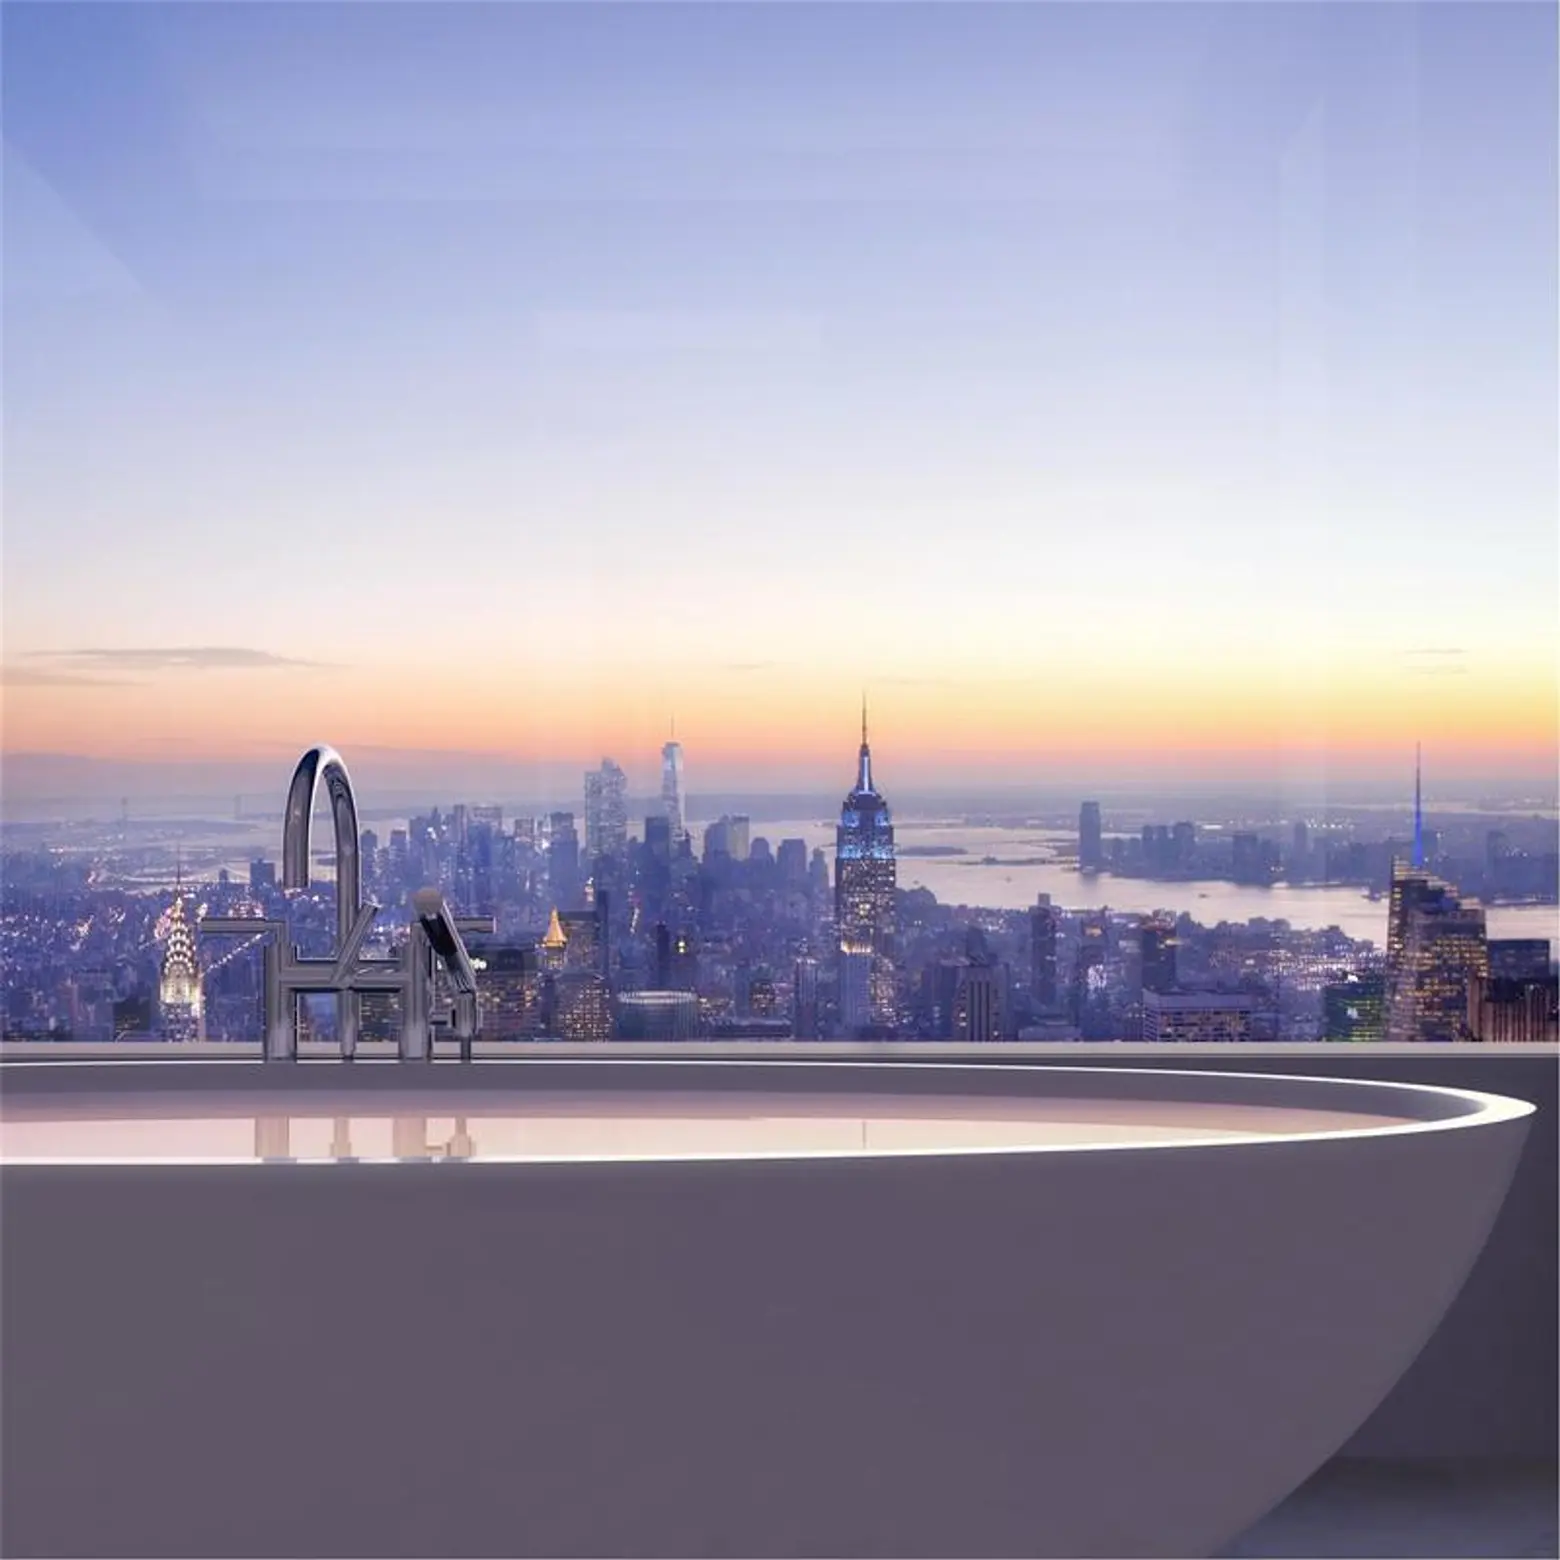 432 Park penthouse, 432 Park Avenue, most expensive condos in NYC